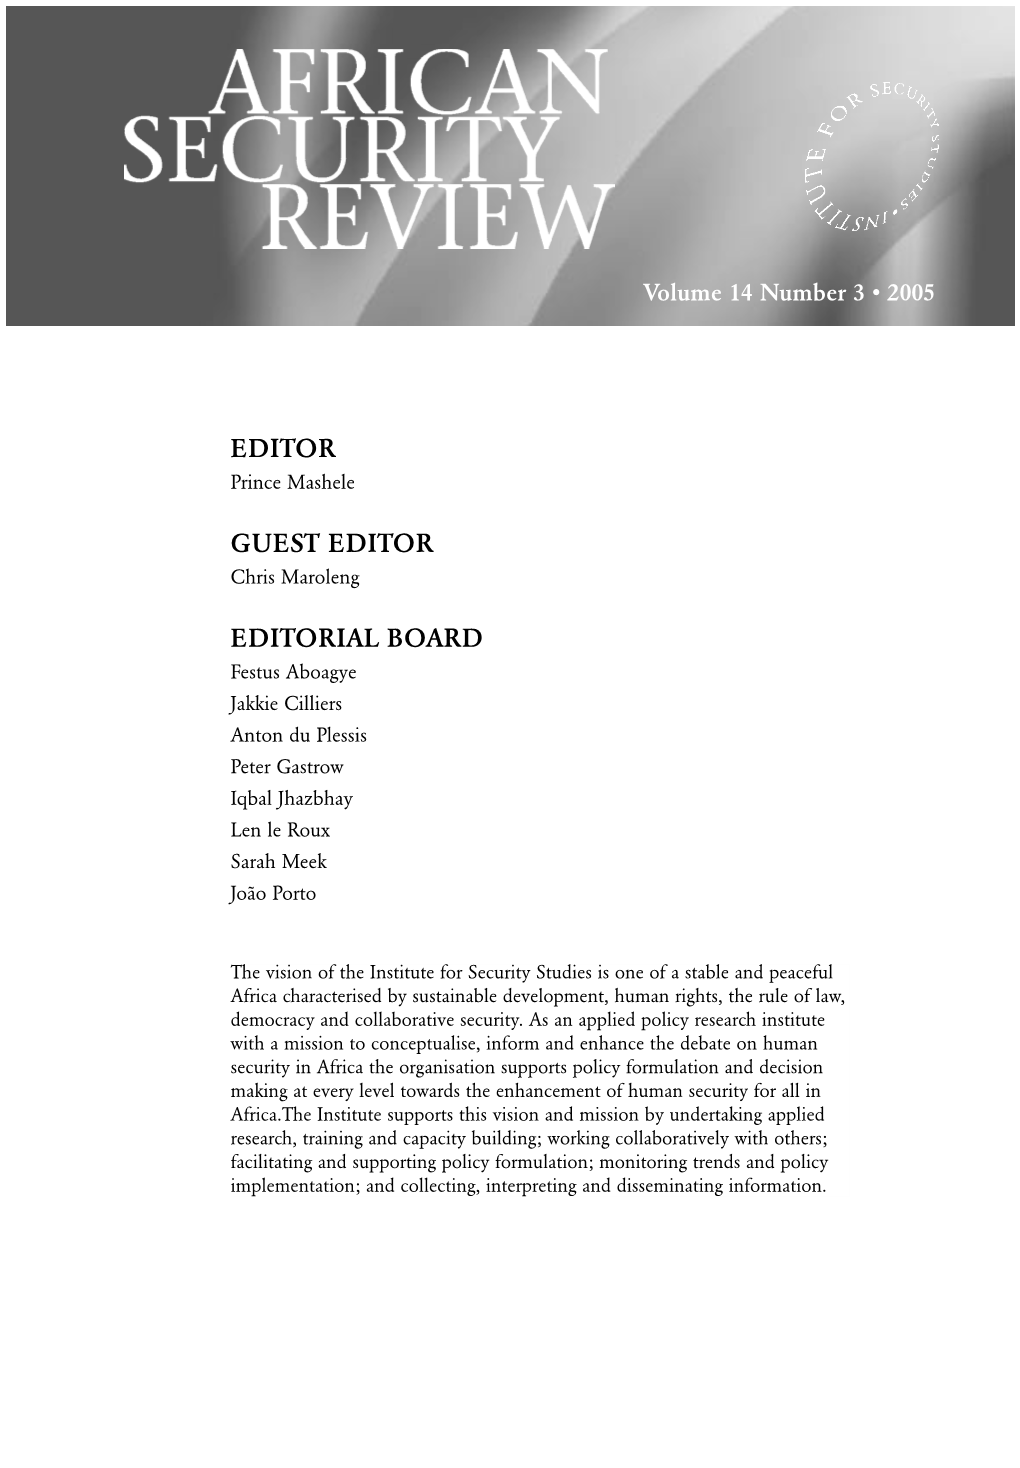 African Security Review, Vol 14 No 3